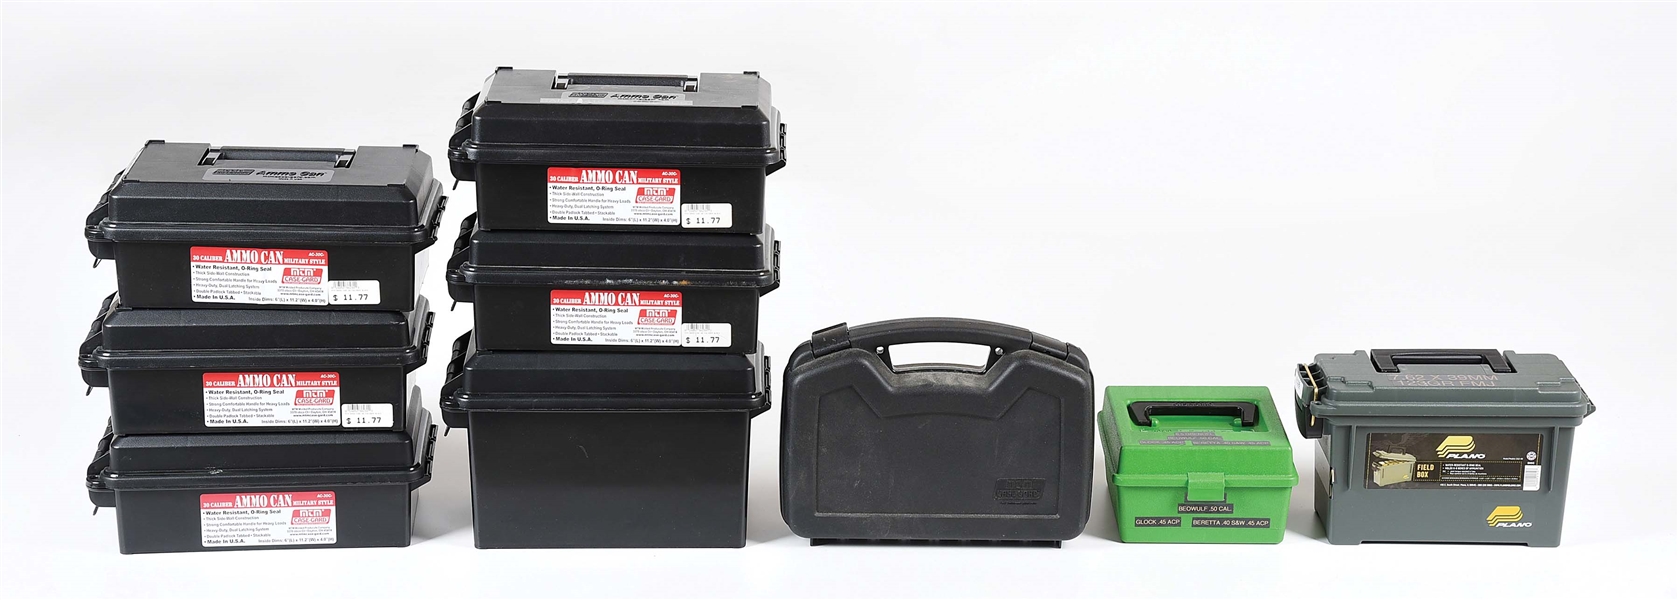 LOT OF 9: 8 EMPTY AMMUNITION CONTAINERS AND A PISTOL CASE.